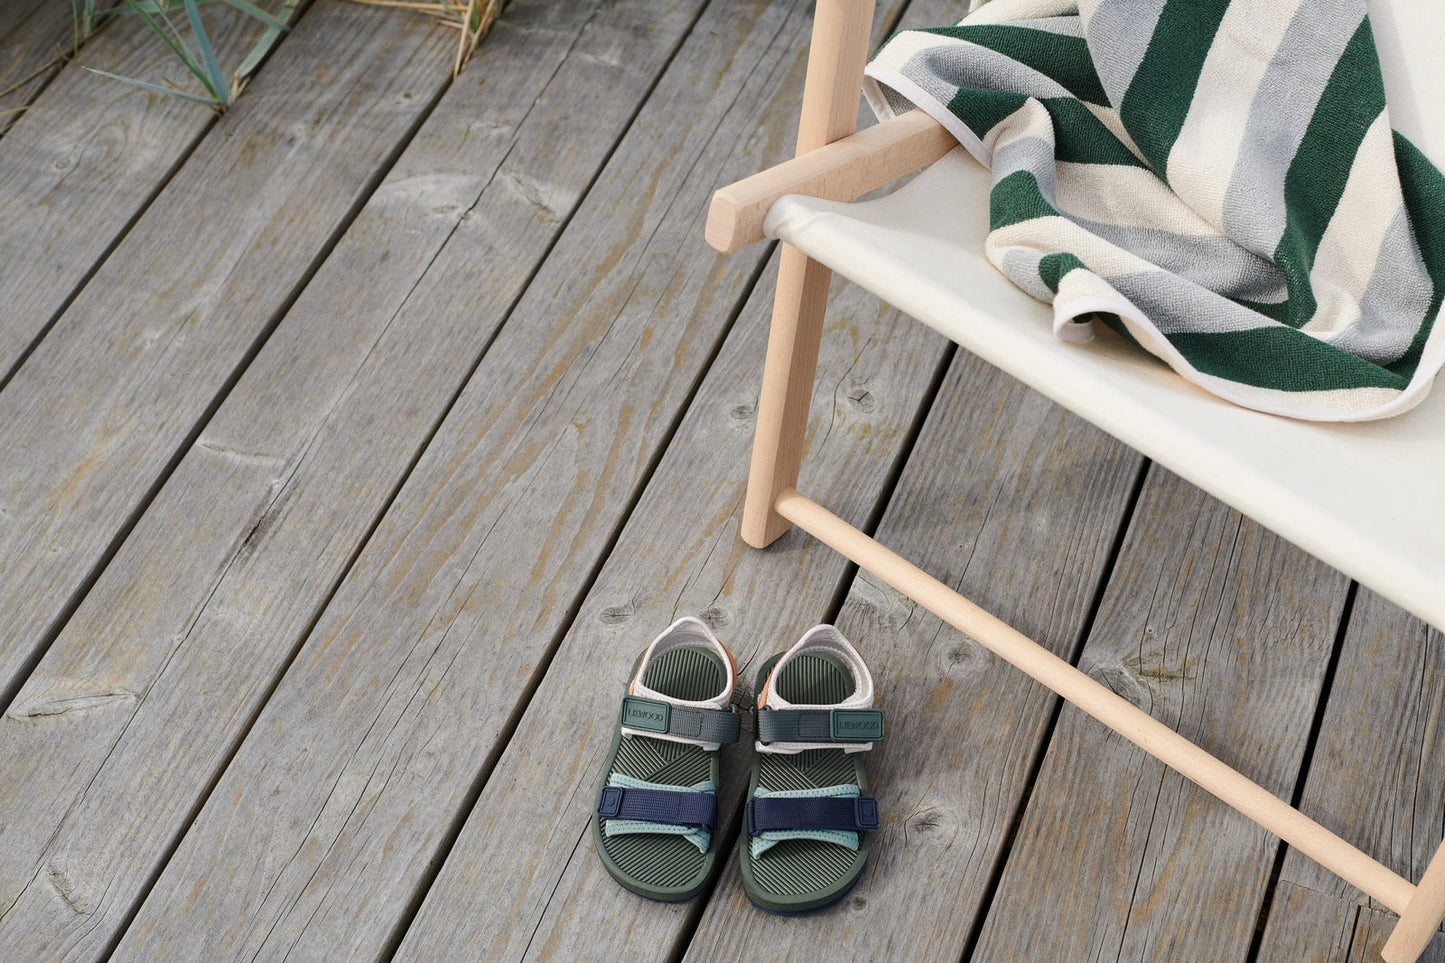 Liewood Monty Sandals, Liewood Monty, Liewood Monty Sandals Hunter Green Mix, Liewood Sandals, Beach Shoes, Summer Shoes, Liewood Stockist, Independent Nottinghamshire Children’s Store